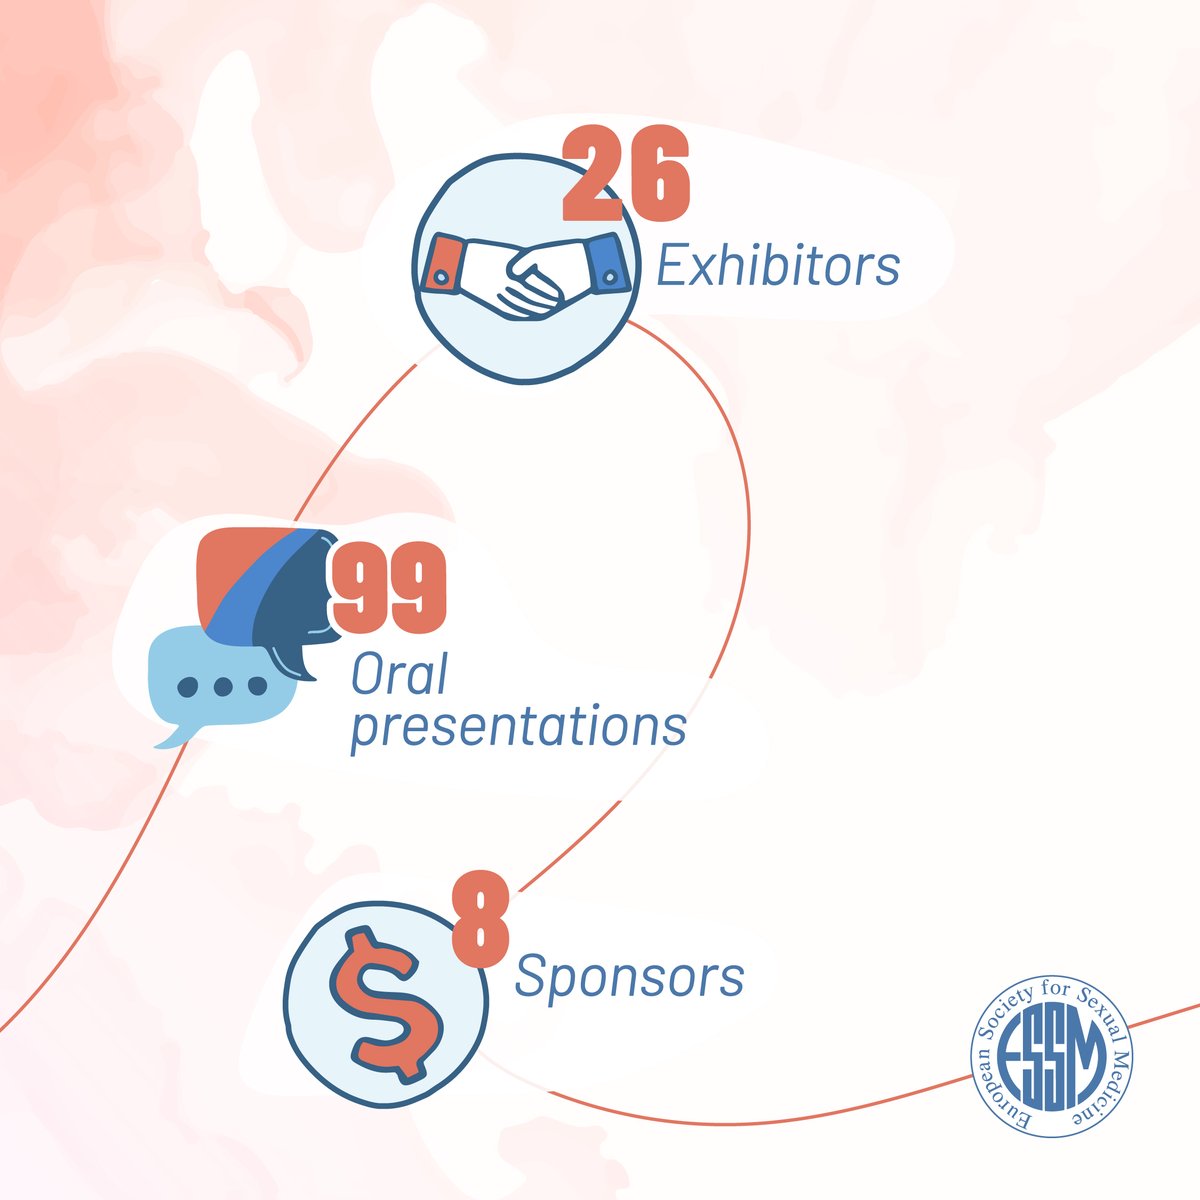 📊 Check out the incredible stats of #ESSM24 Congressi in #Bari. If you want to be updated on the upcoming events, visit our website 👇🏻 bit.ly/43LB0C4 #ESSMCongress #SexualHealth #Sexology #SexMed